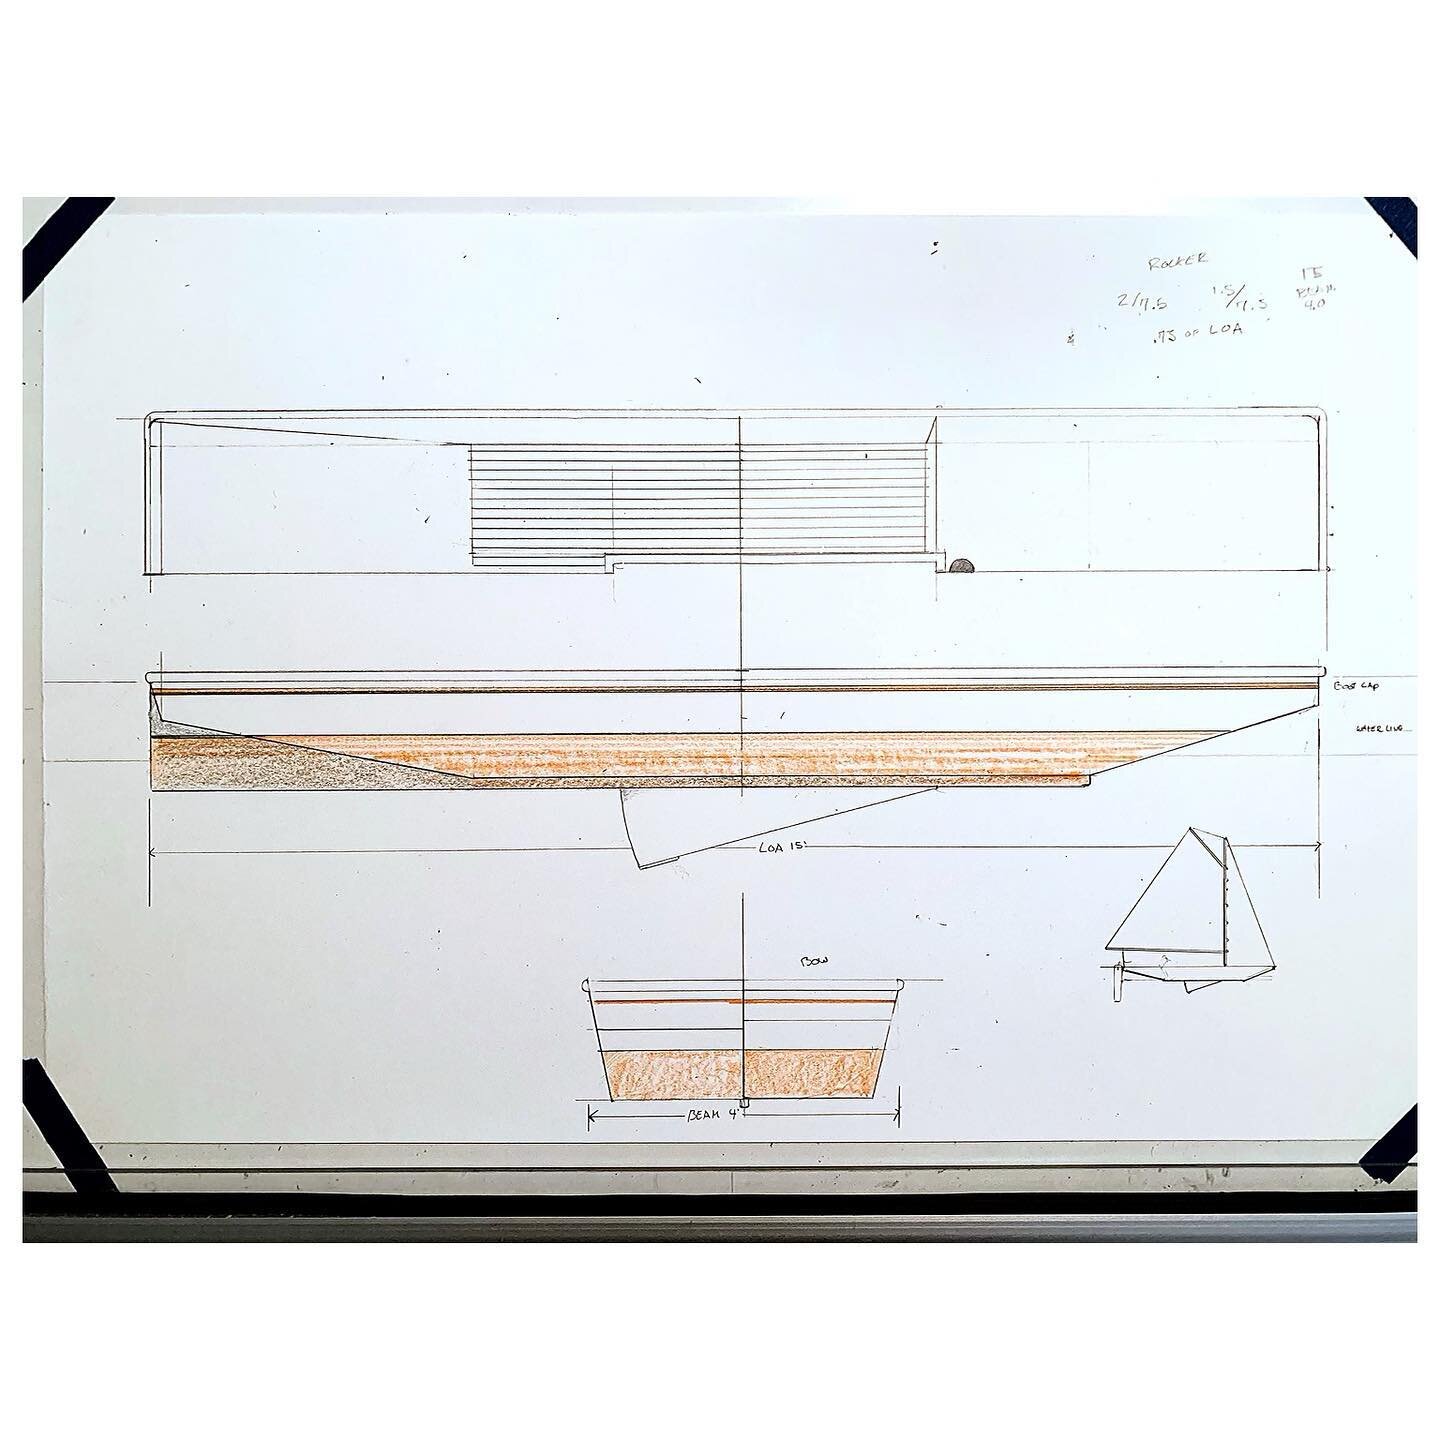 &ldquo;Of all models this form of boat is the easiest to build; it requires the fewest tools and the least hours of work to complete in any given length&rdquo;  Chapelle